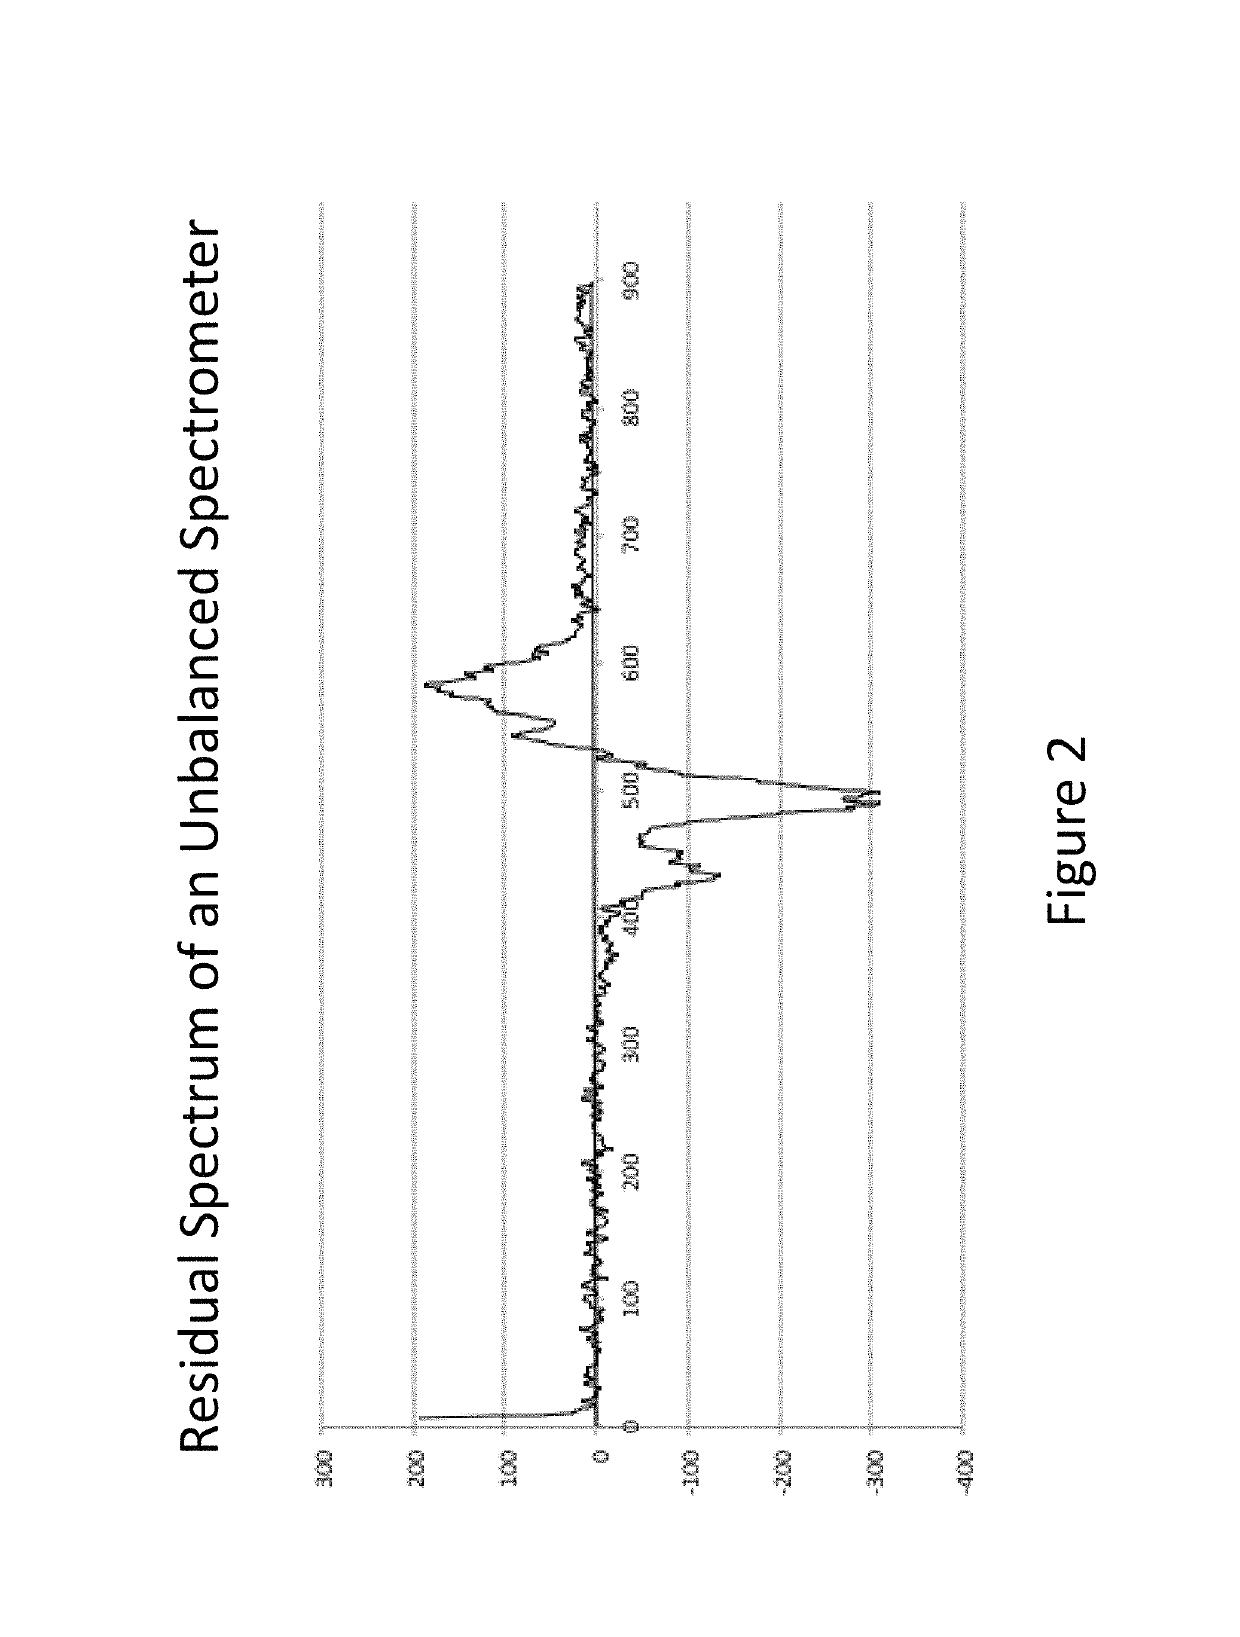 Method to obtain full range intrinsic spectral signatures for spectroscopy and spectral imaging